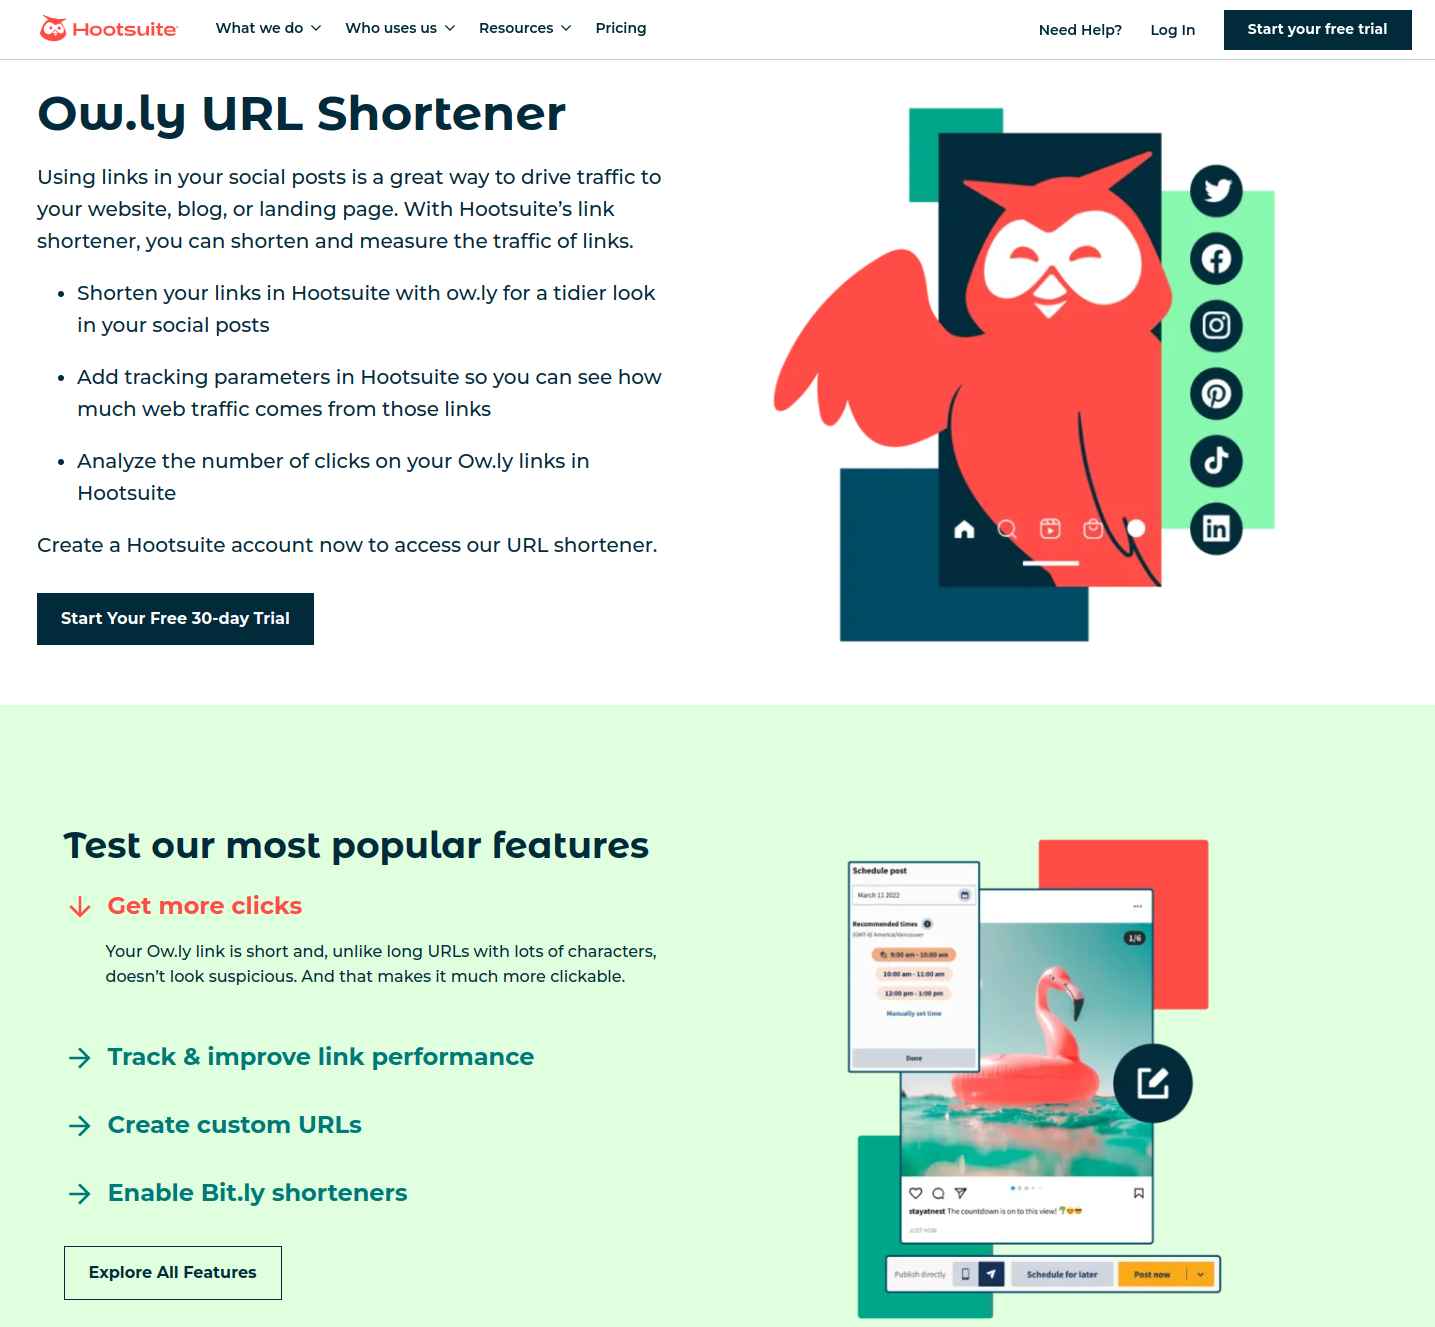 Simple & easy to use URL shortener Owly